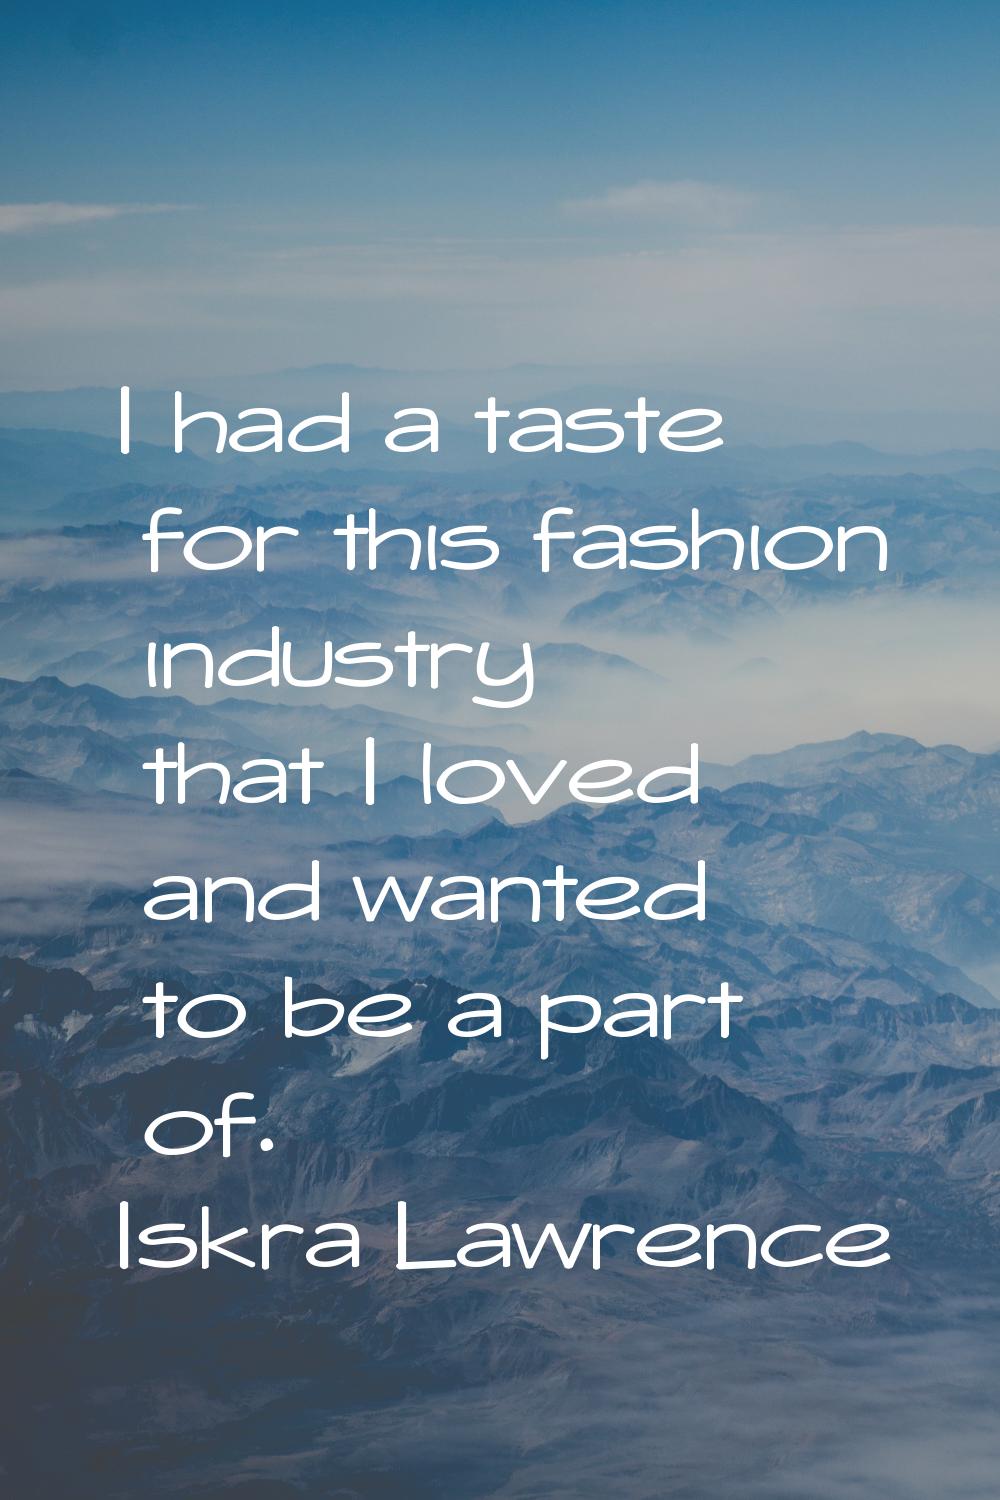 I had a taste for this fashion industry that I loved and wanted to be a part of.